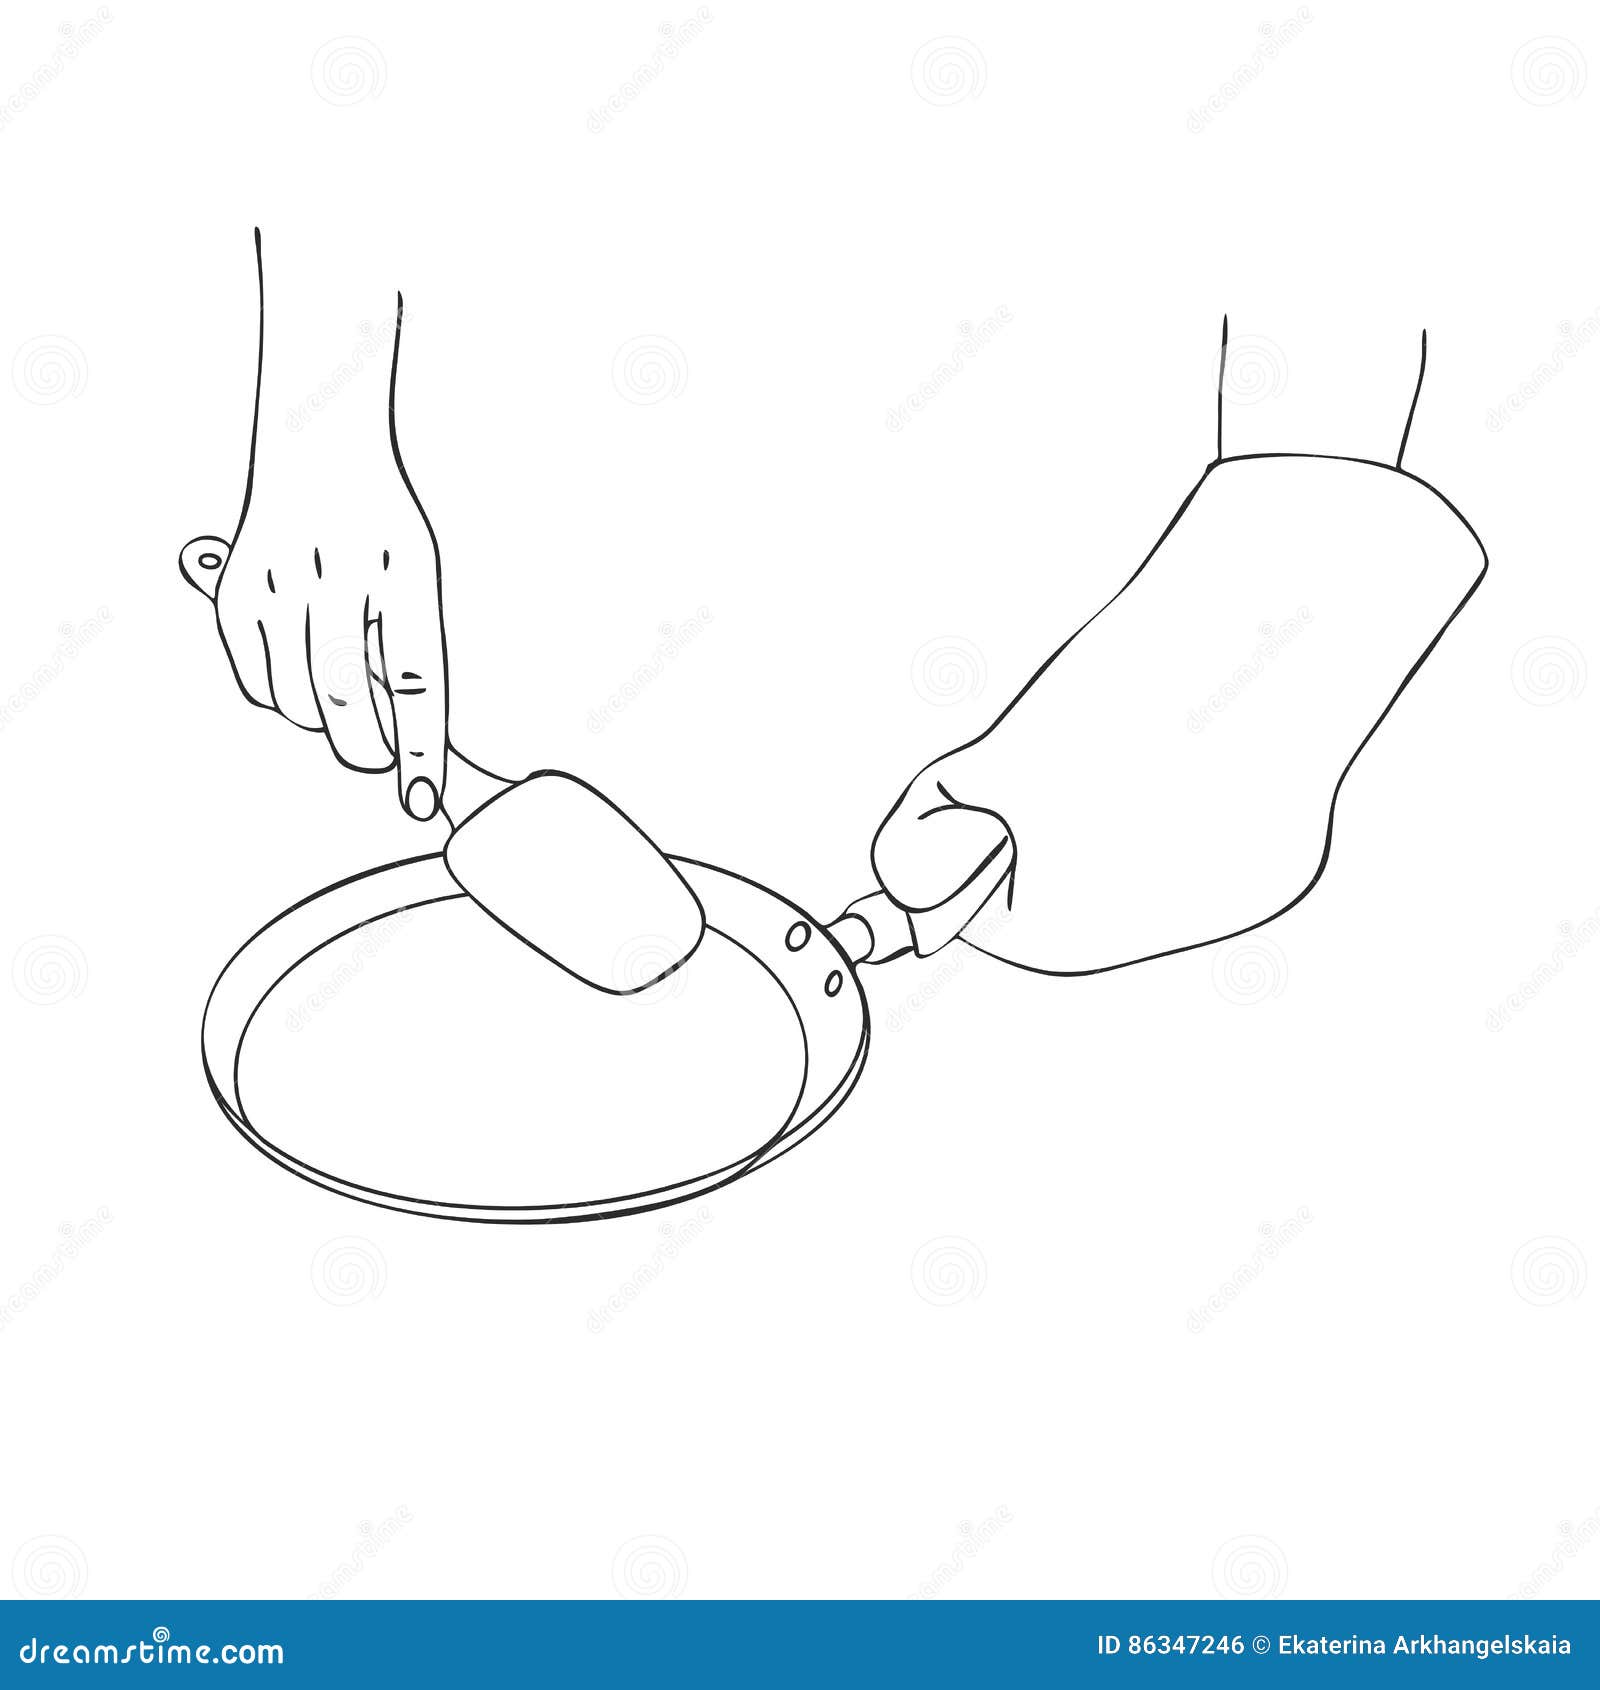 Cooking hands with pan stock vector. Illustration of preparation - 86347246